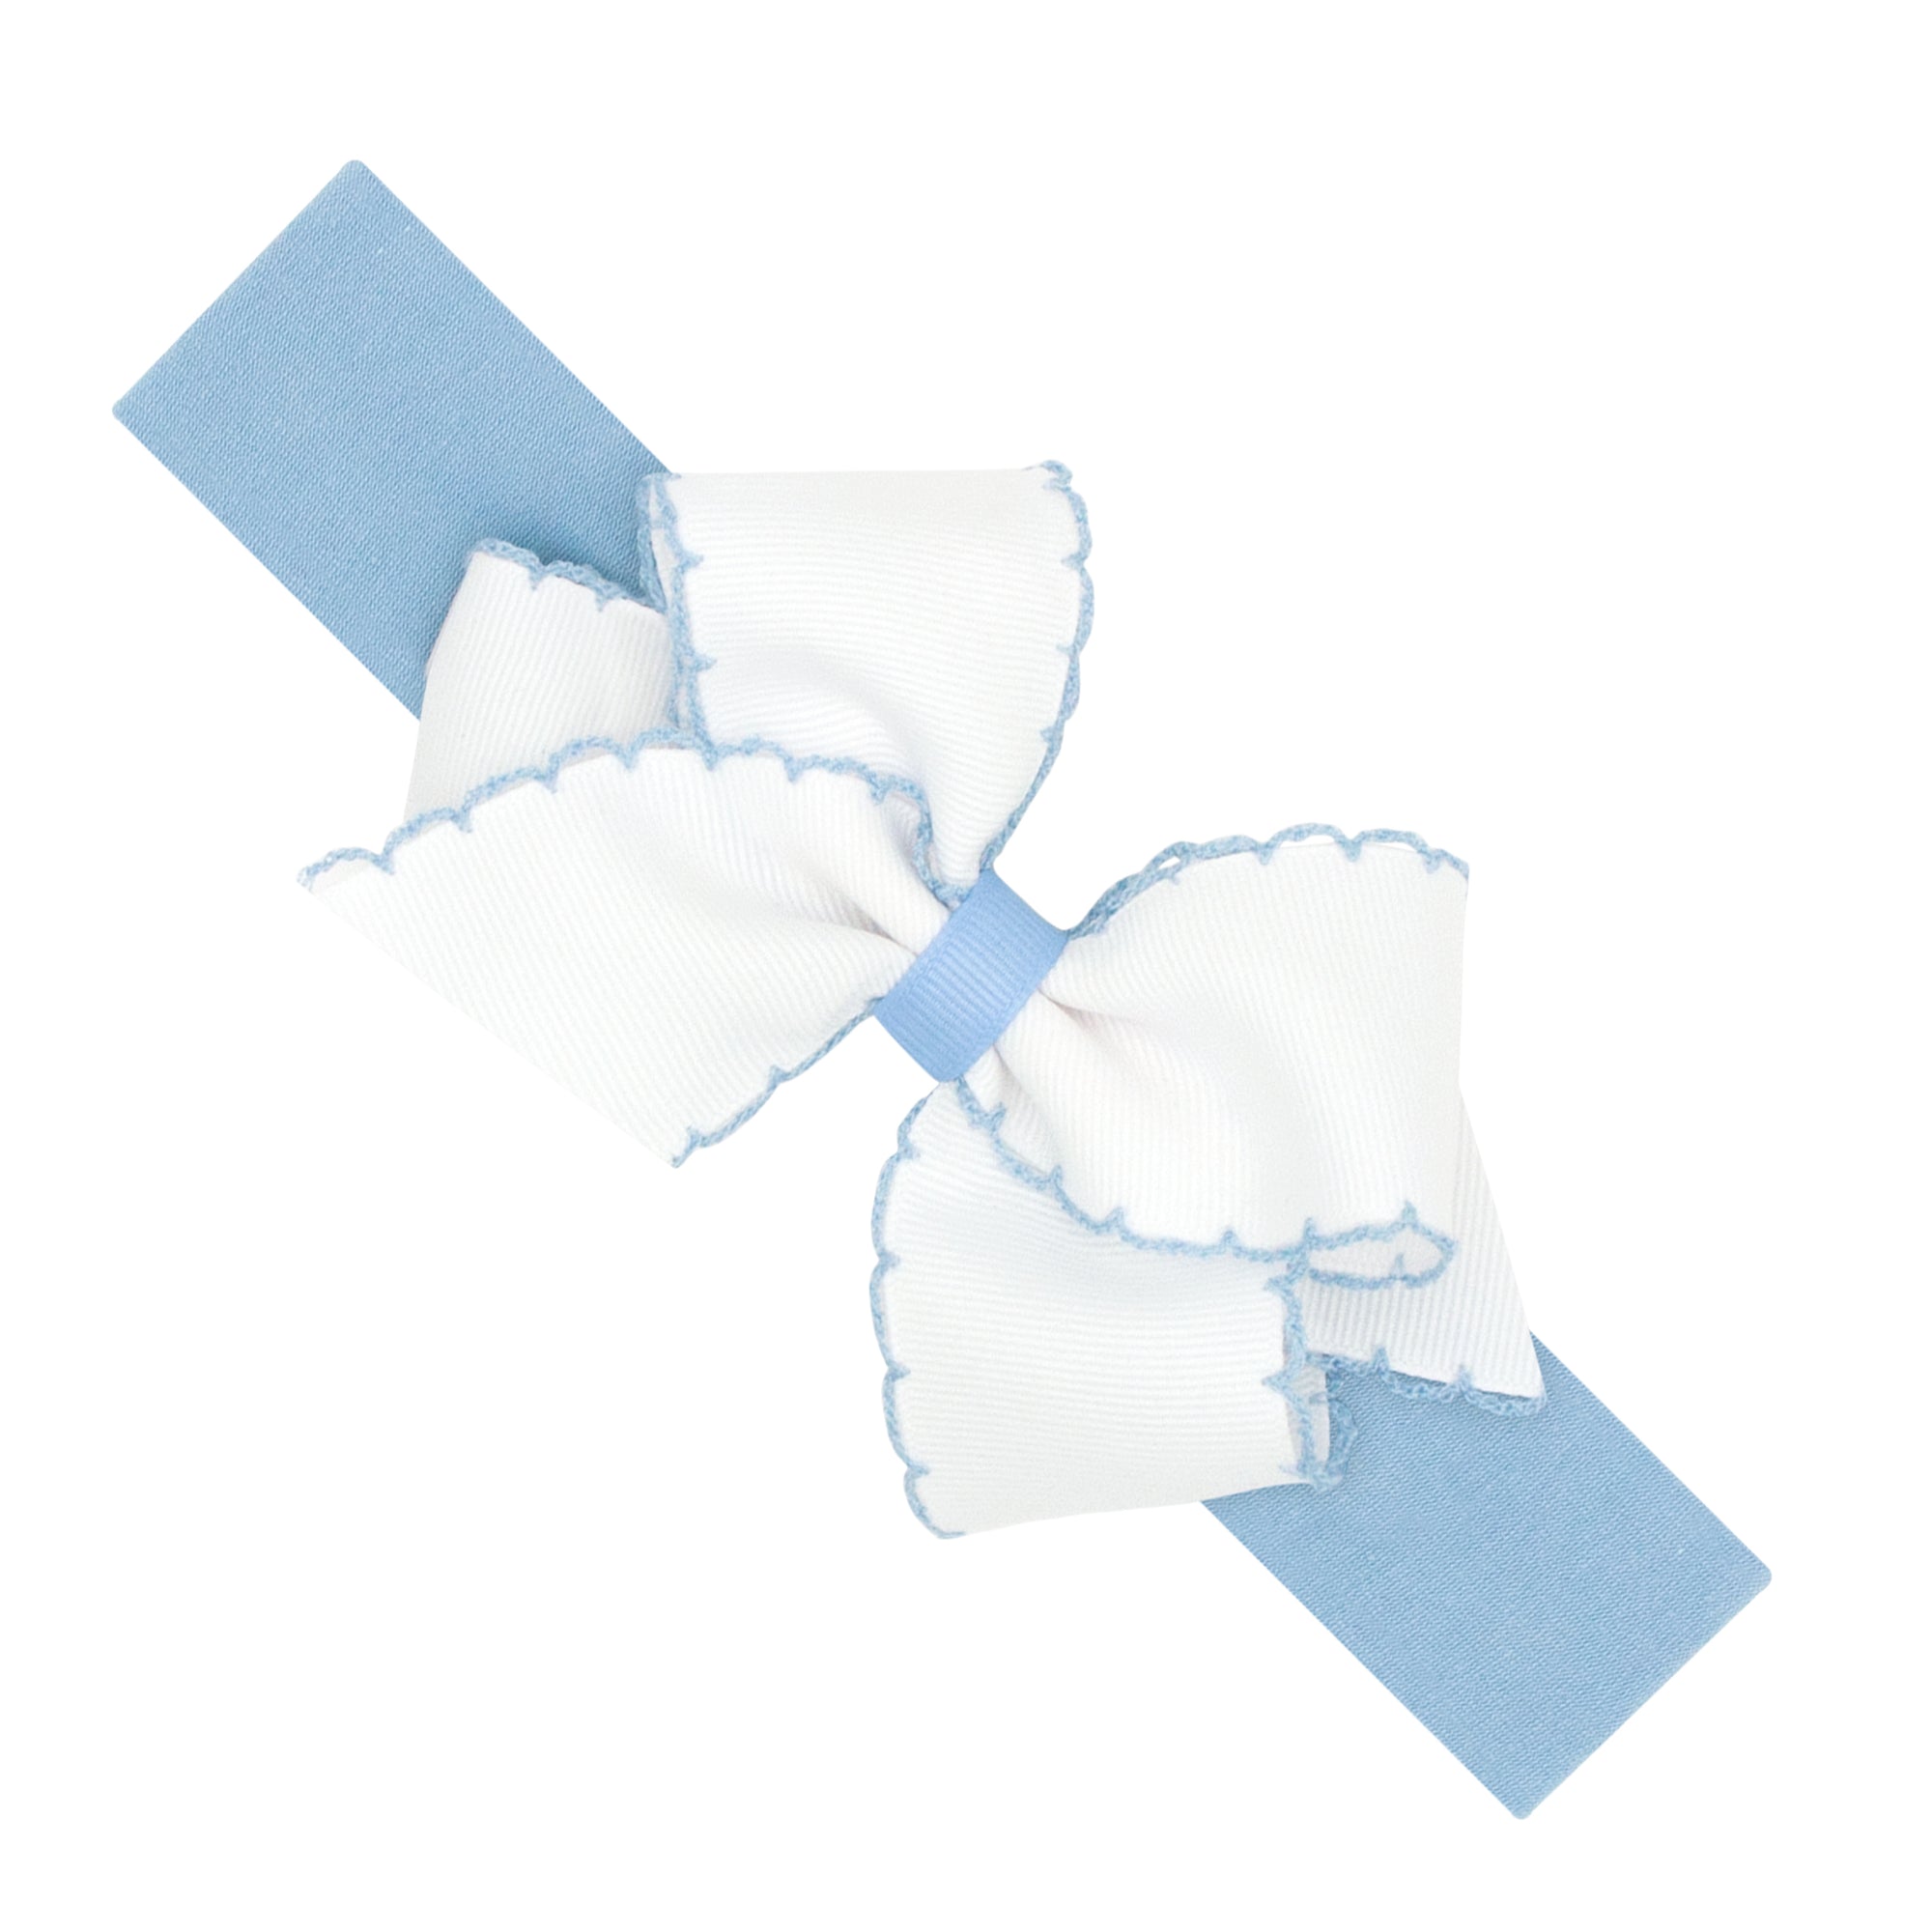 Grosgrain Hairbow with Contrast Moonstitch Edge on Cotton Jersey Band | Assorted Colors